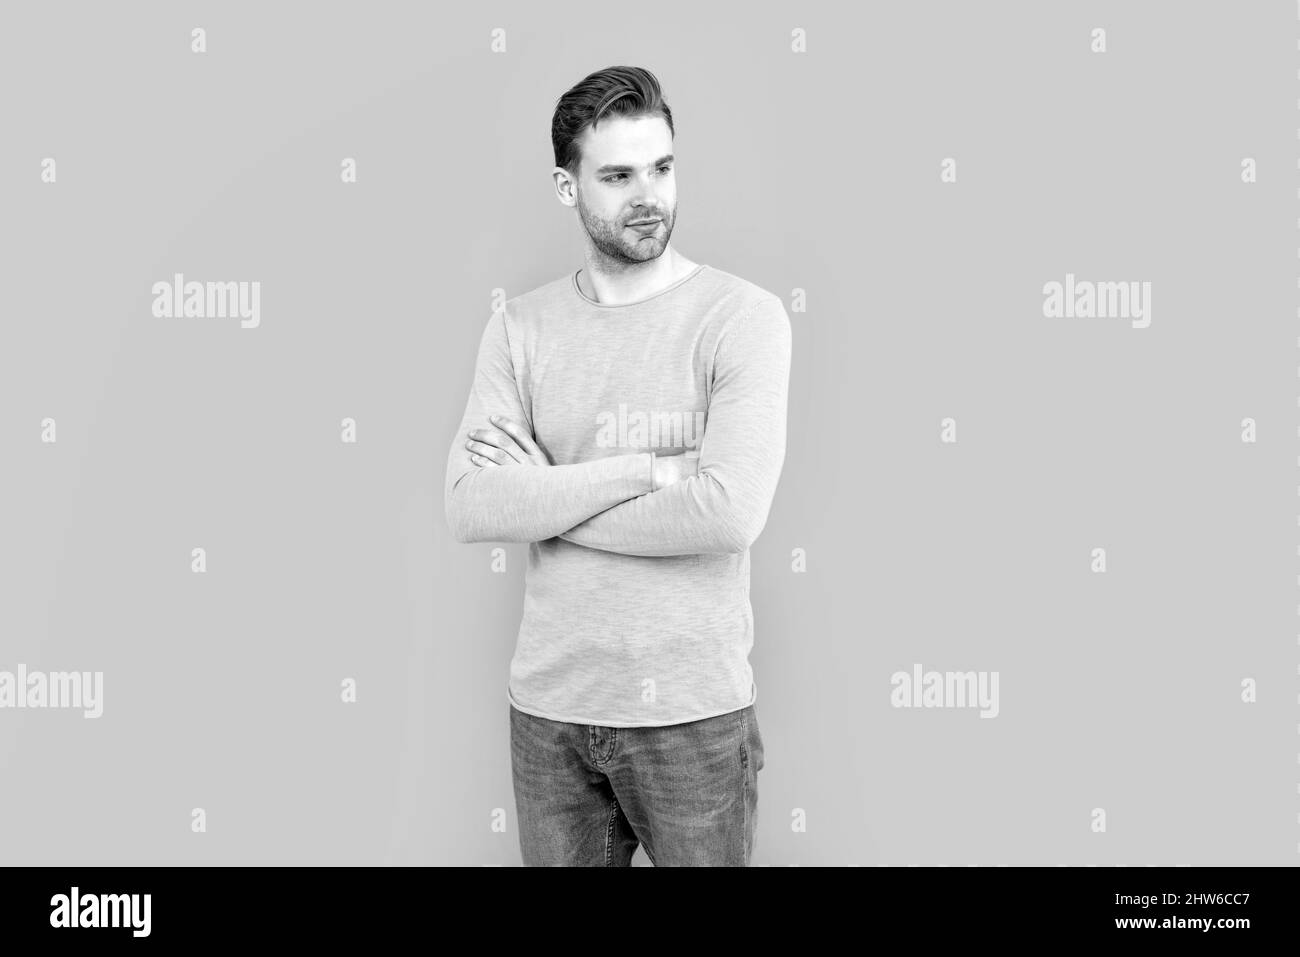 Put on confidence. Confident man grey background. Fashion man keep arms crossed Stock Photo